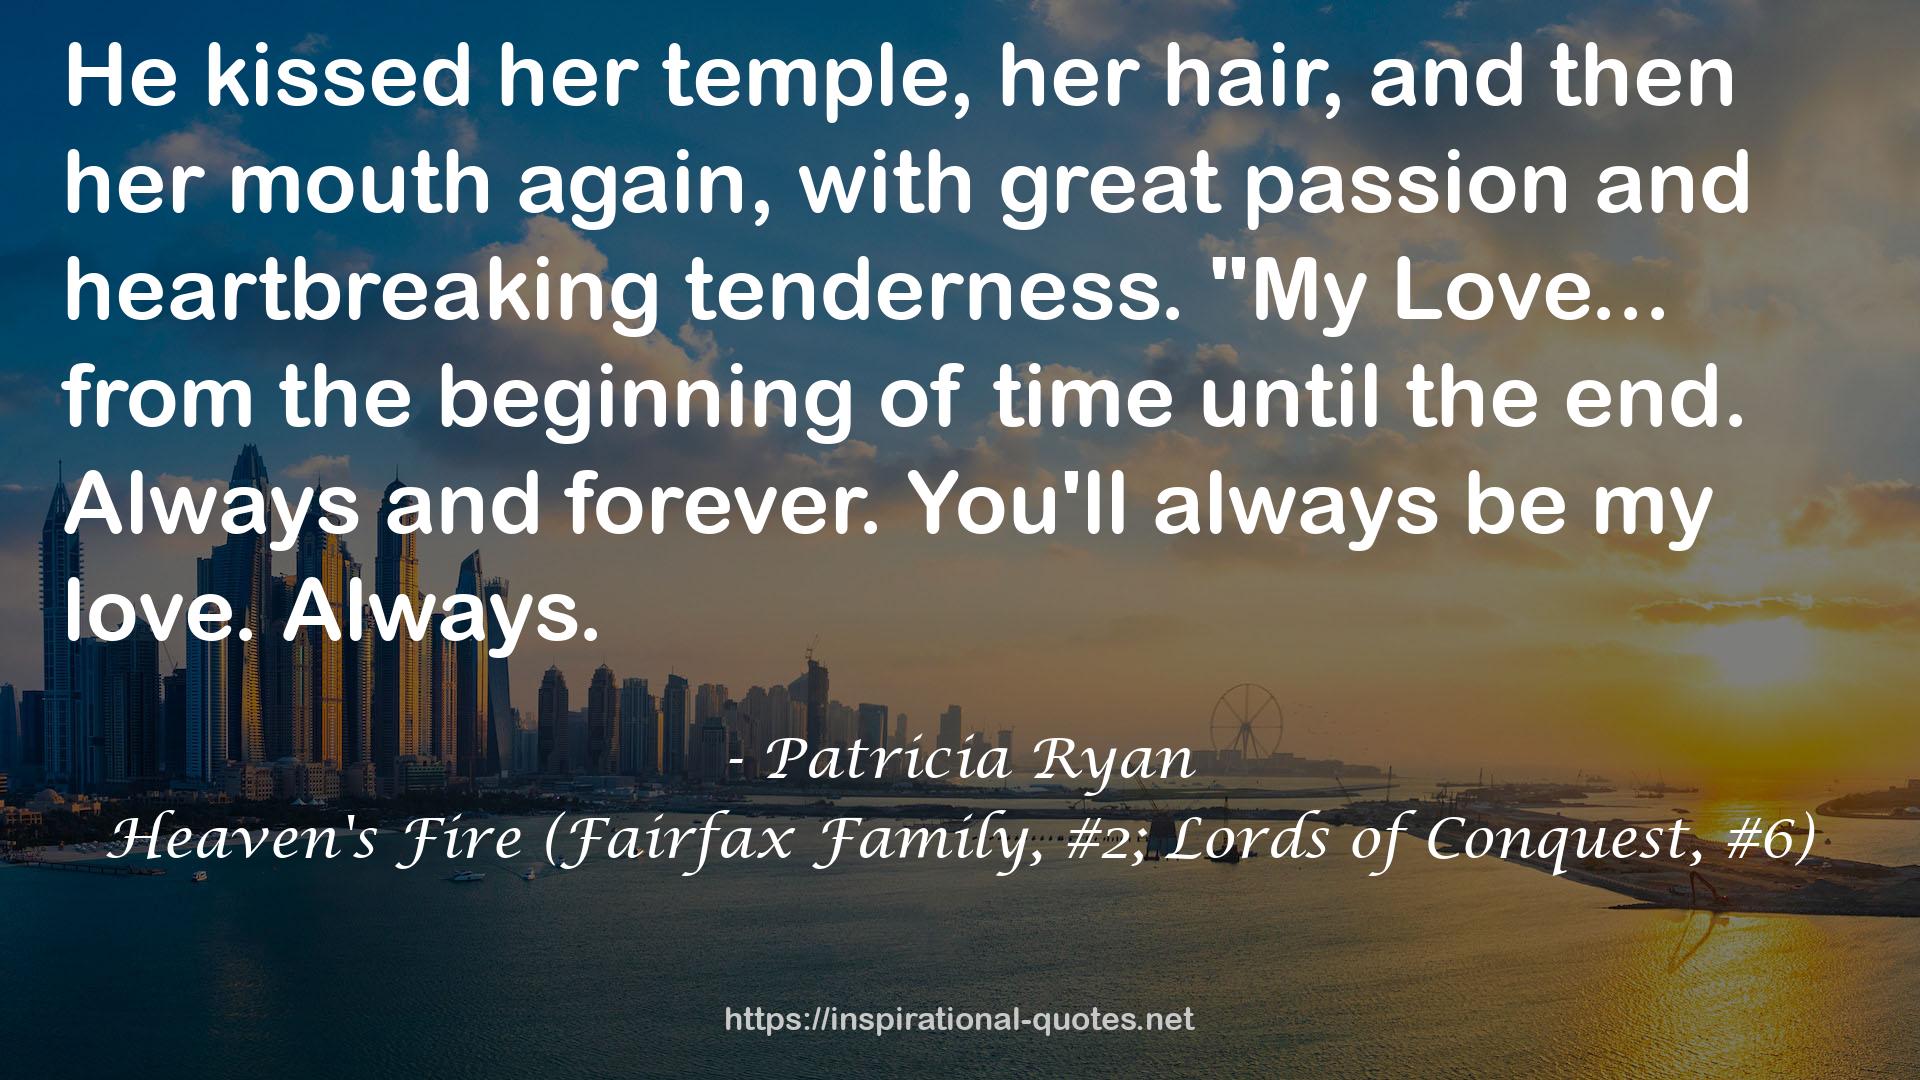 Heaven's Fire (Fairfax Family, #2; Lords of Conquest, #6) QUOTES